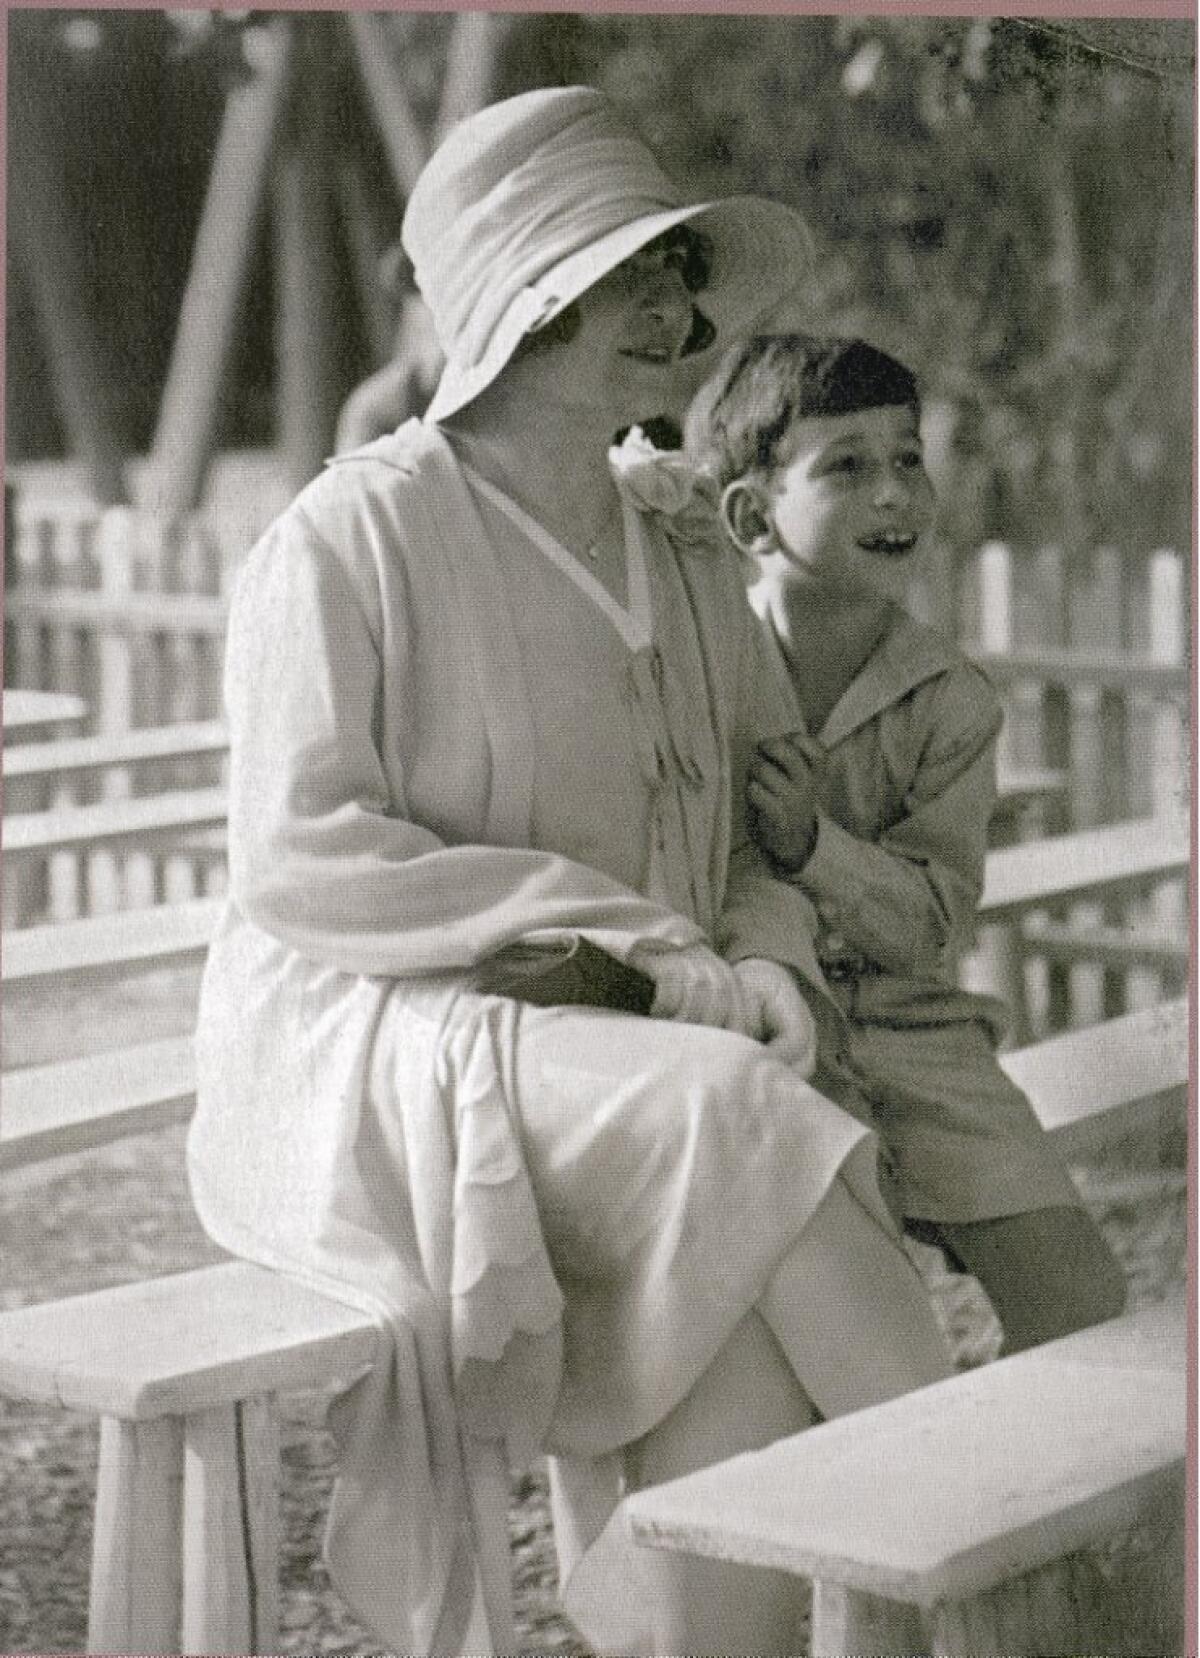 A photo provided by the family of Claude Cassirer as a young boy with his grandmother, Lilly Cassirer.